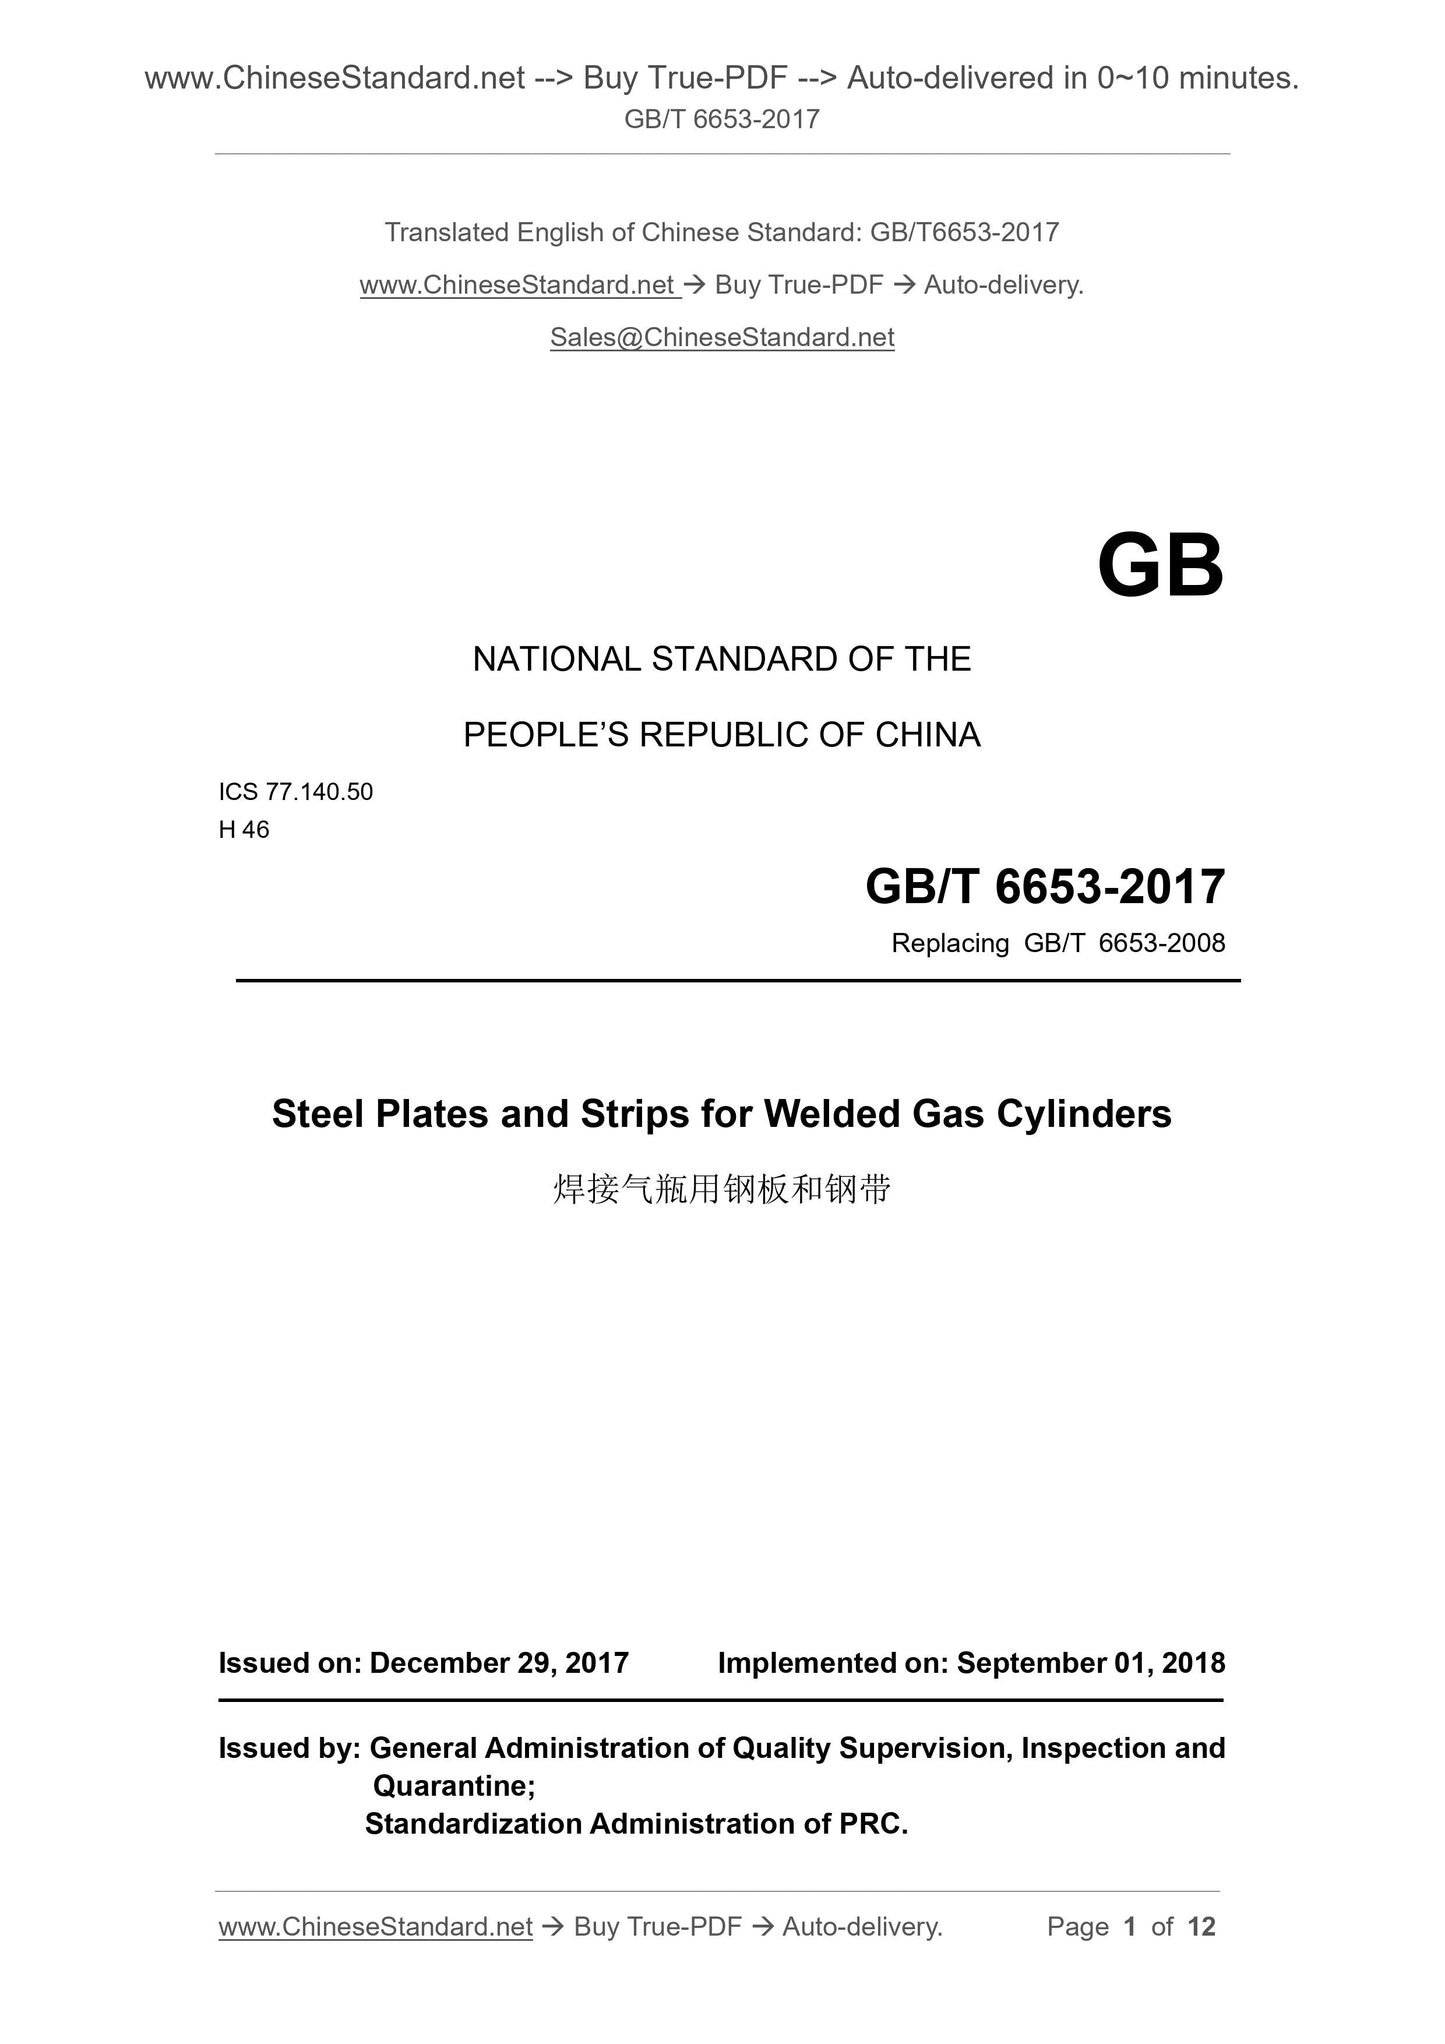 GB/T 6653-2017 Page 1